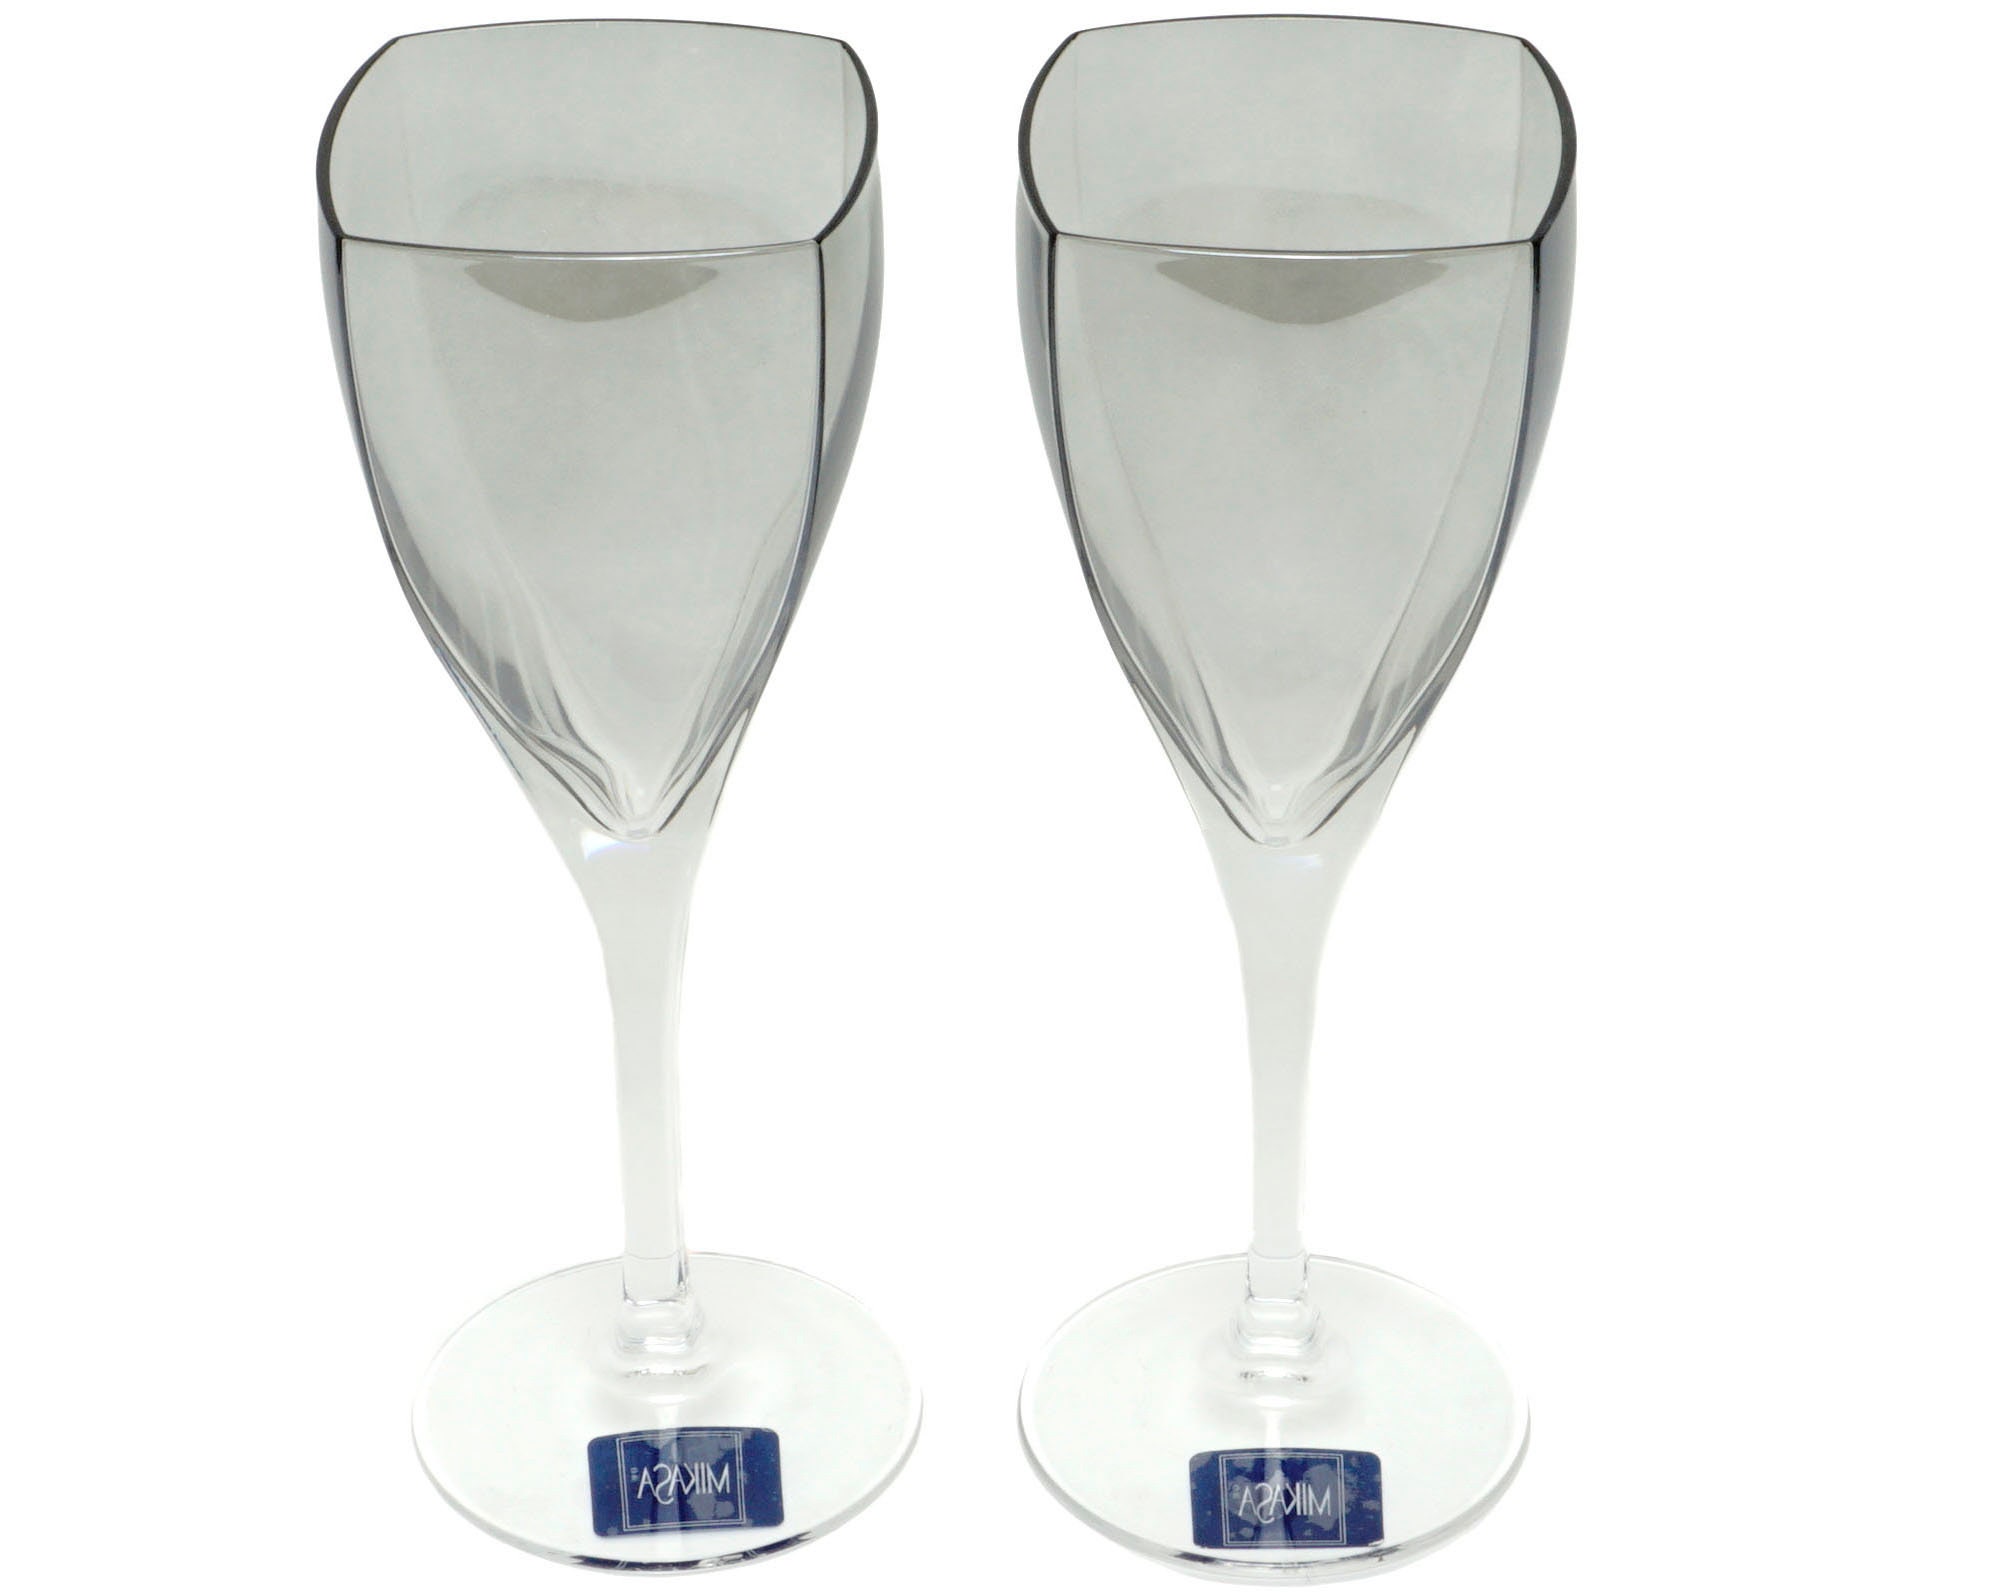 Set of 2 Matching Mikasa Crystal Stemmed Martini Glasses in a Frosted or  Satin Cheers Artistry Square Links Quilt Pattern. Bar 648 -  Finland